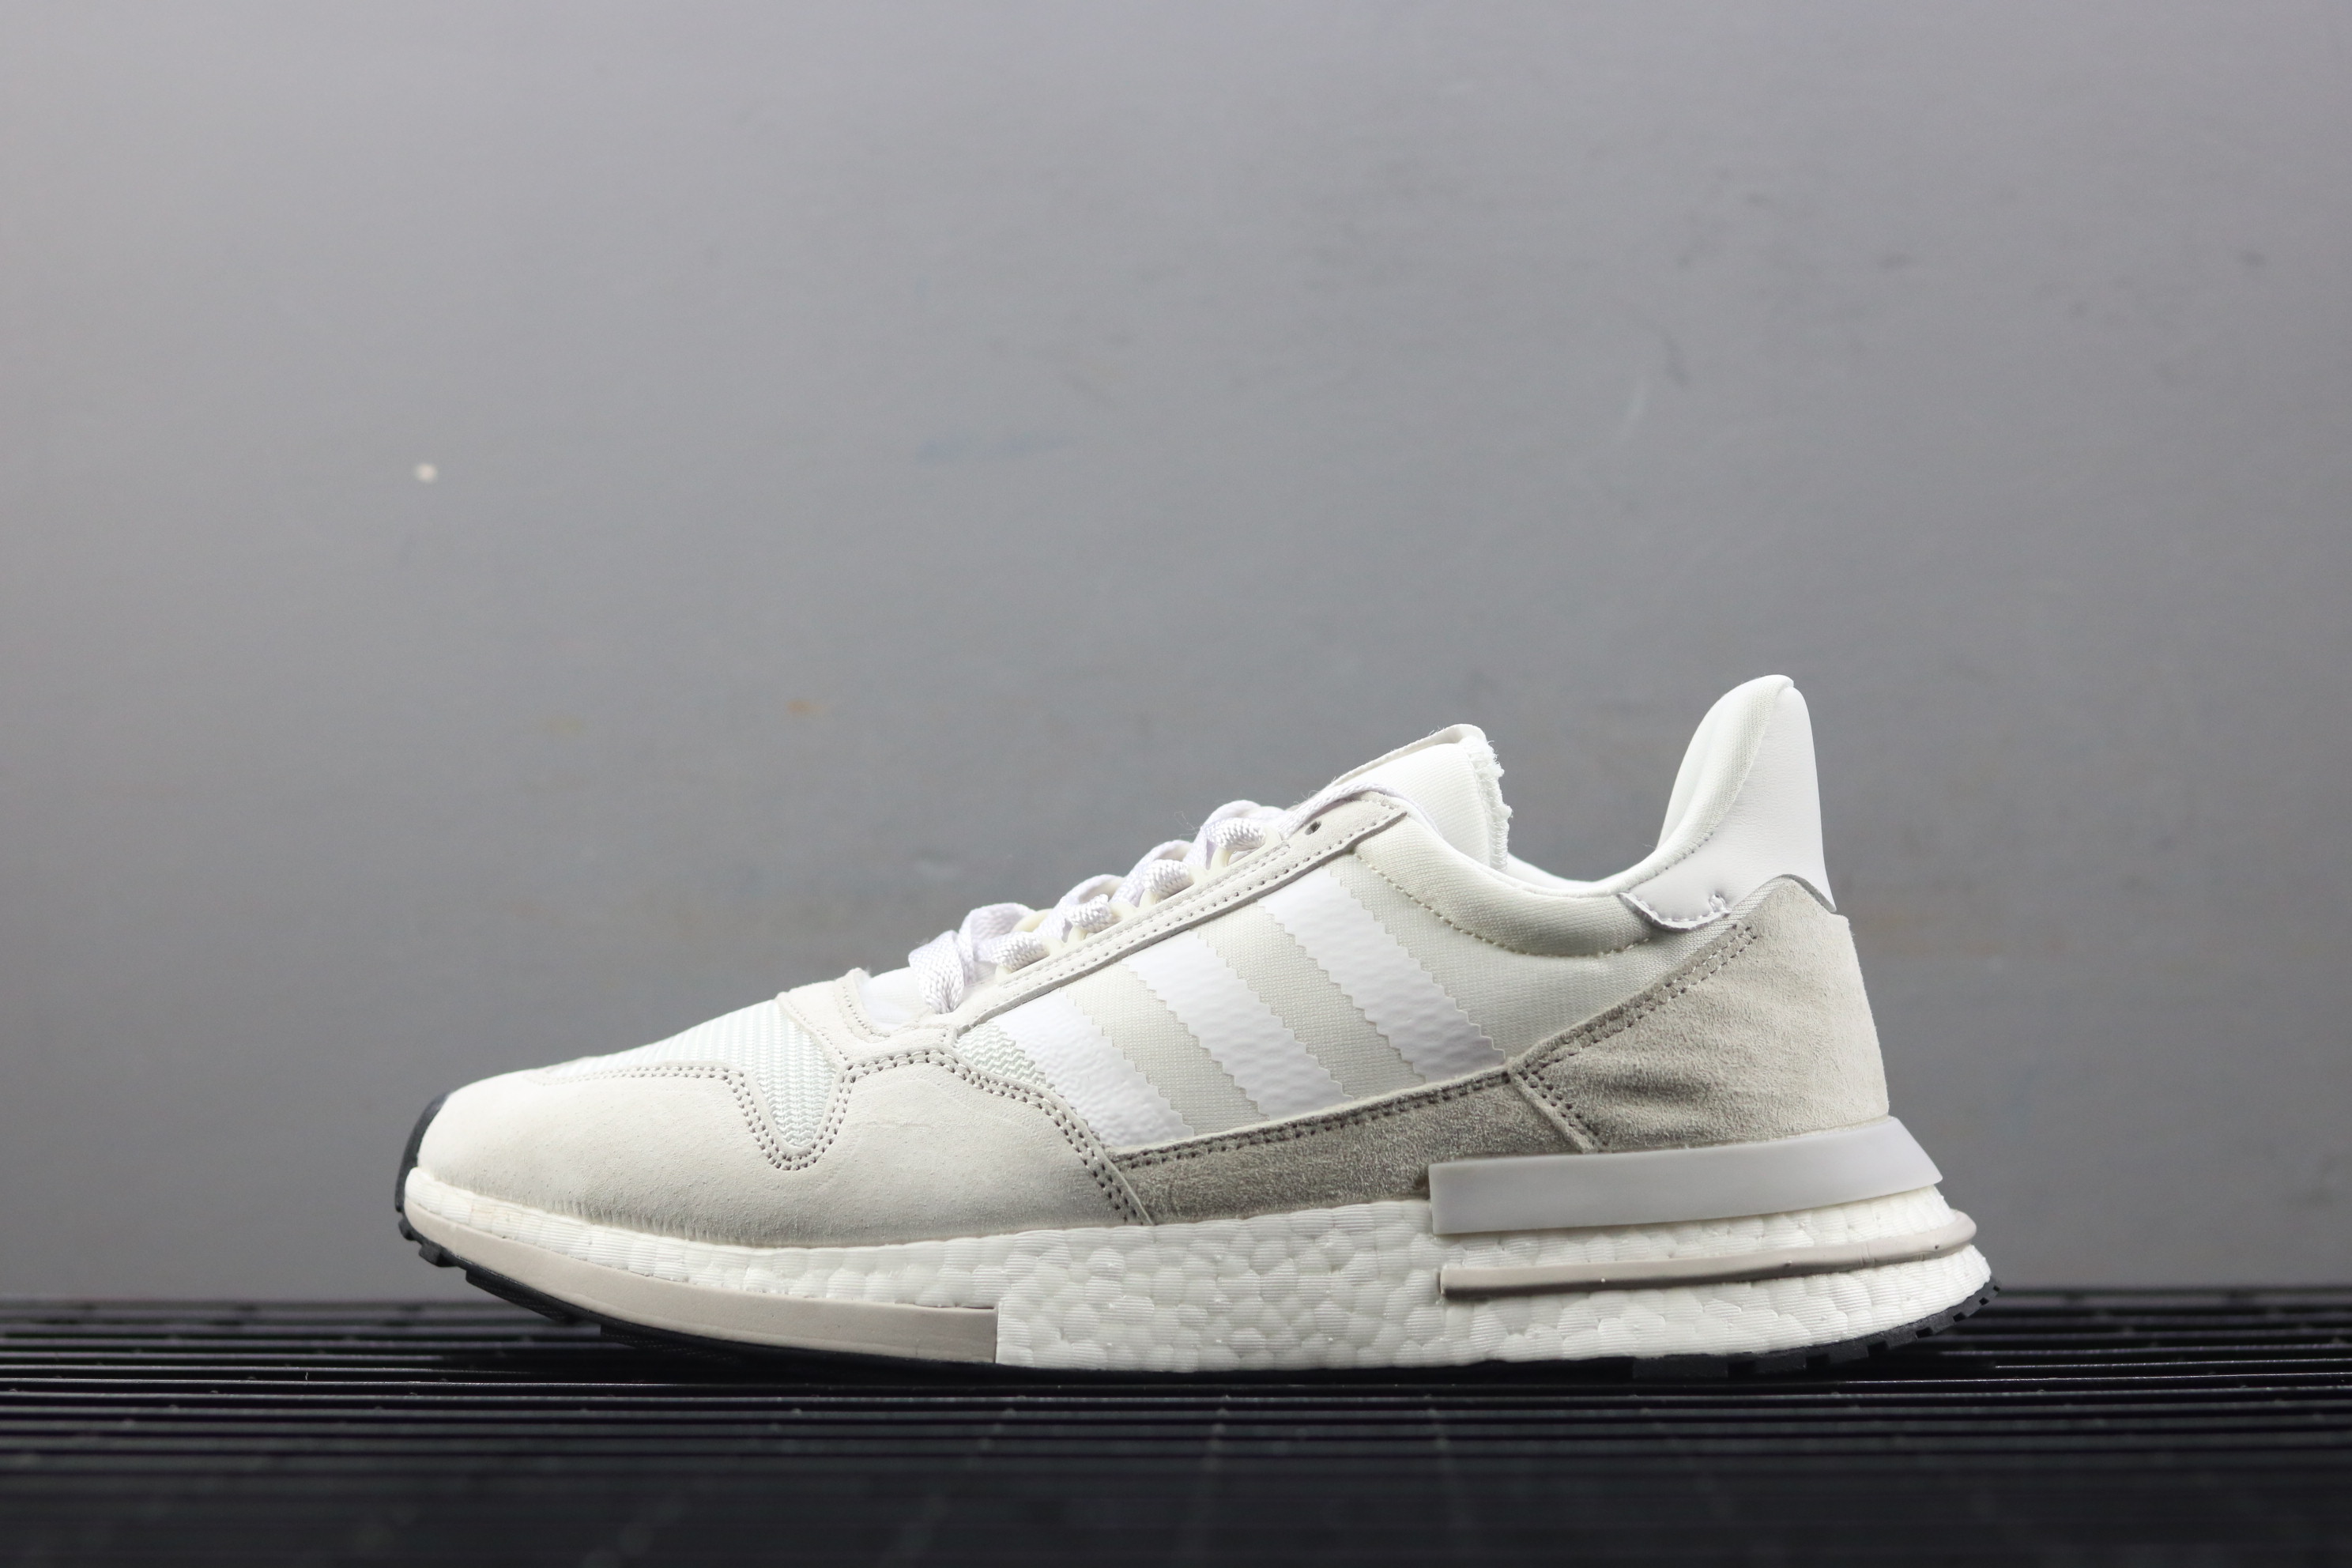 adidas ZX 500 RM White Grey – The Sole Line